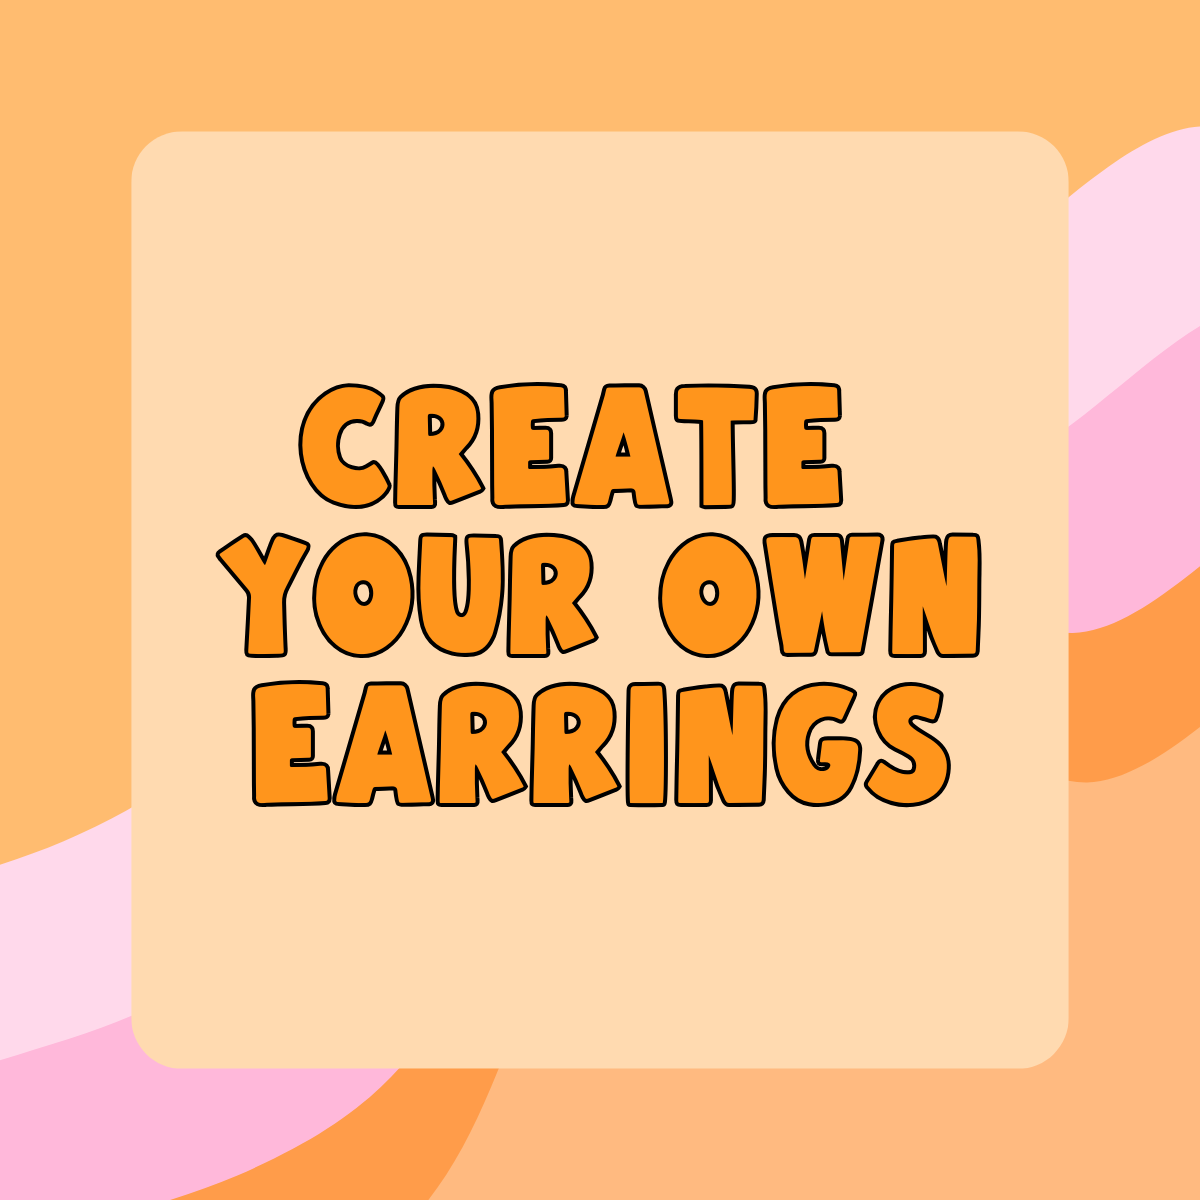 Create Your Own Earrings!